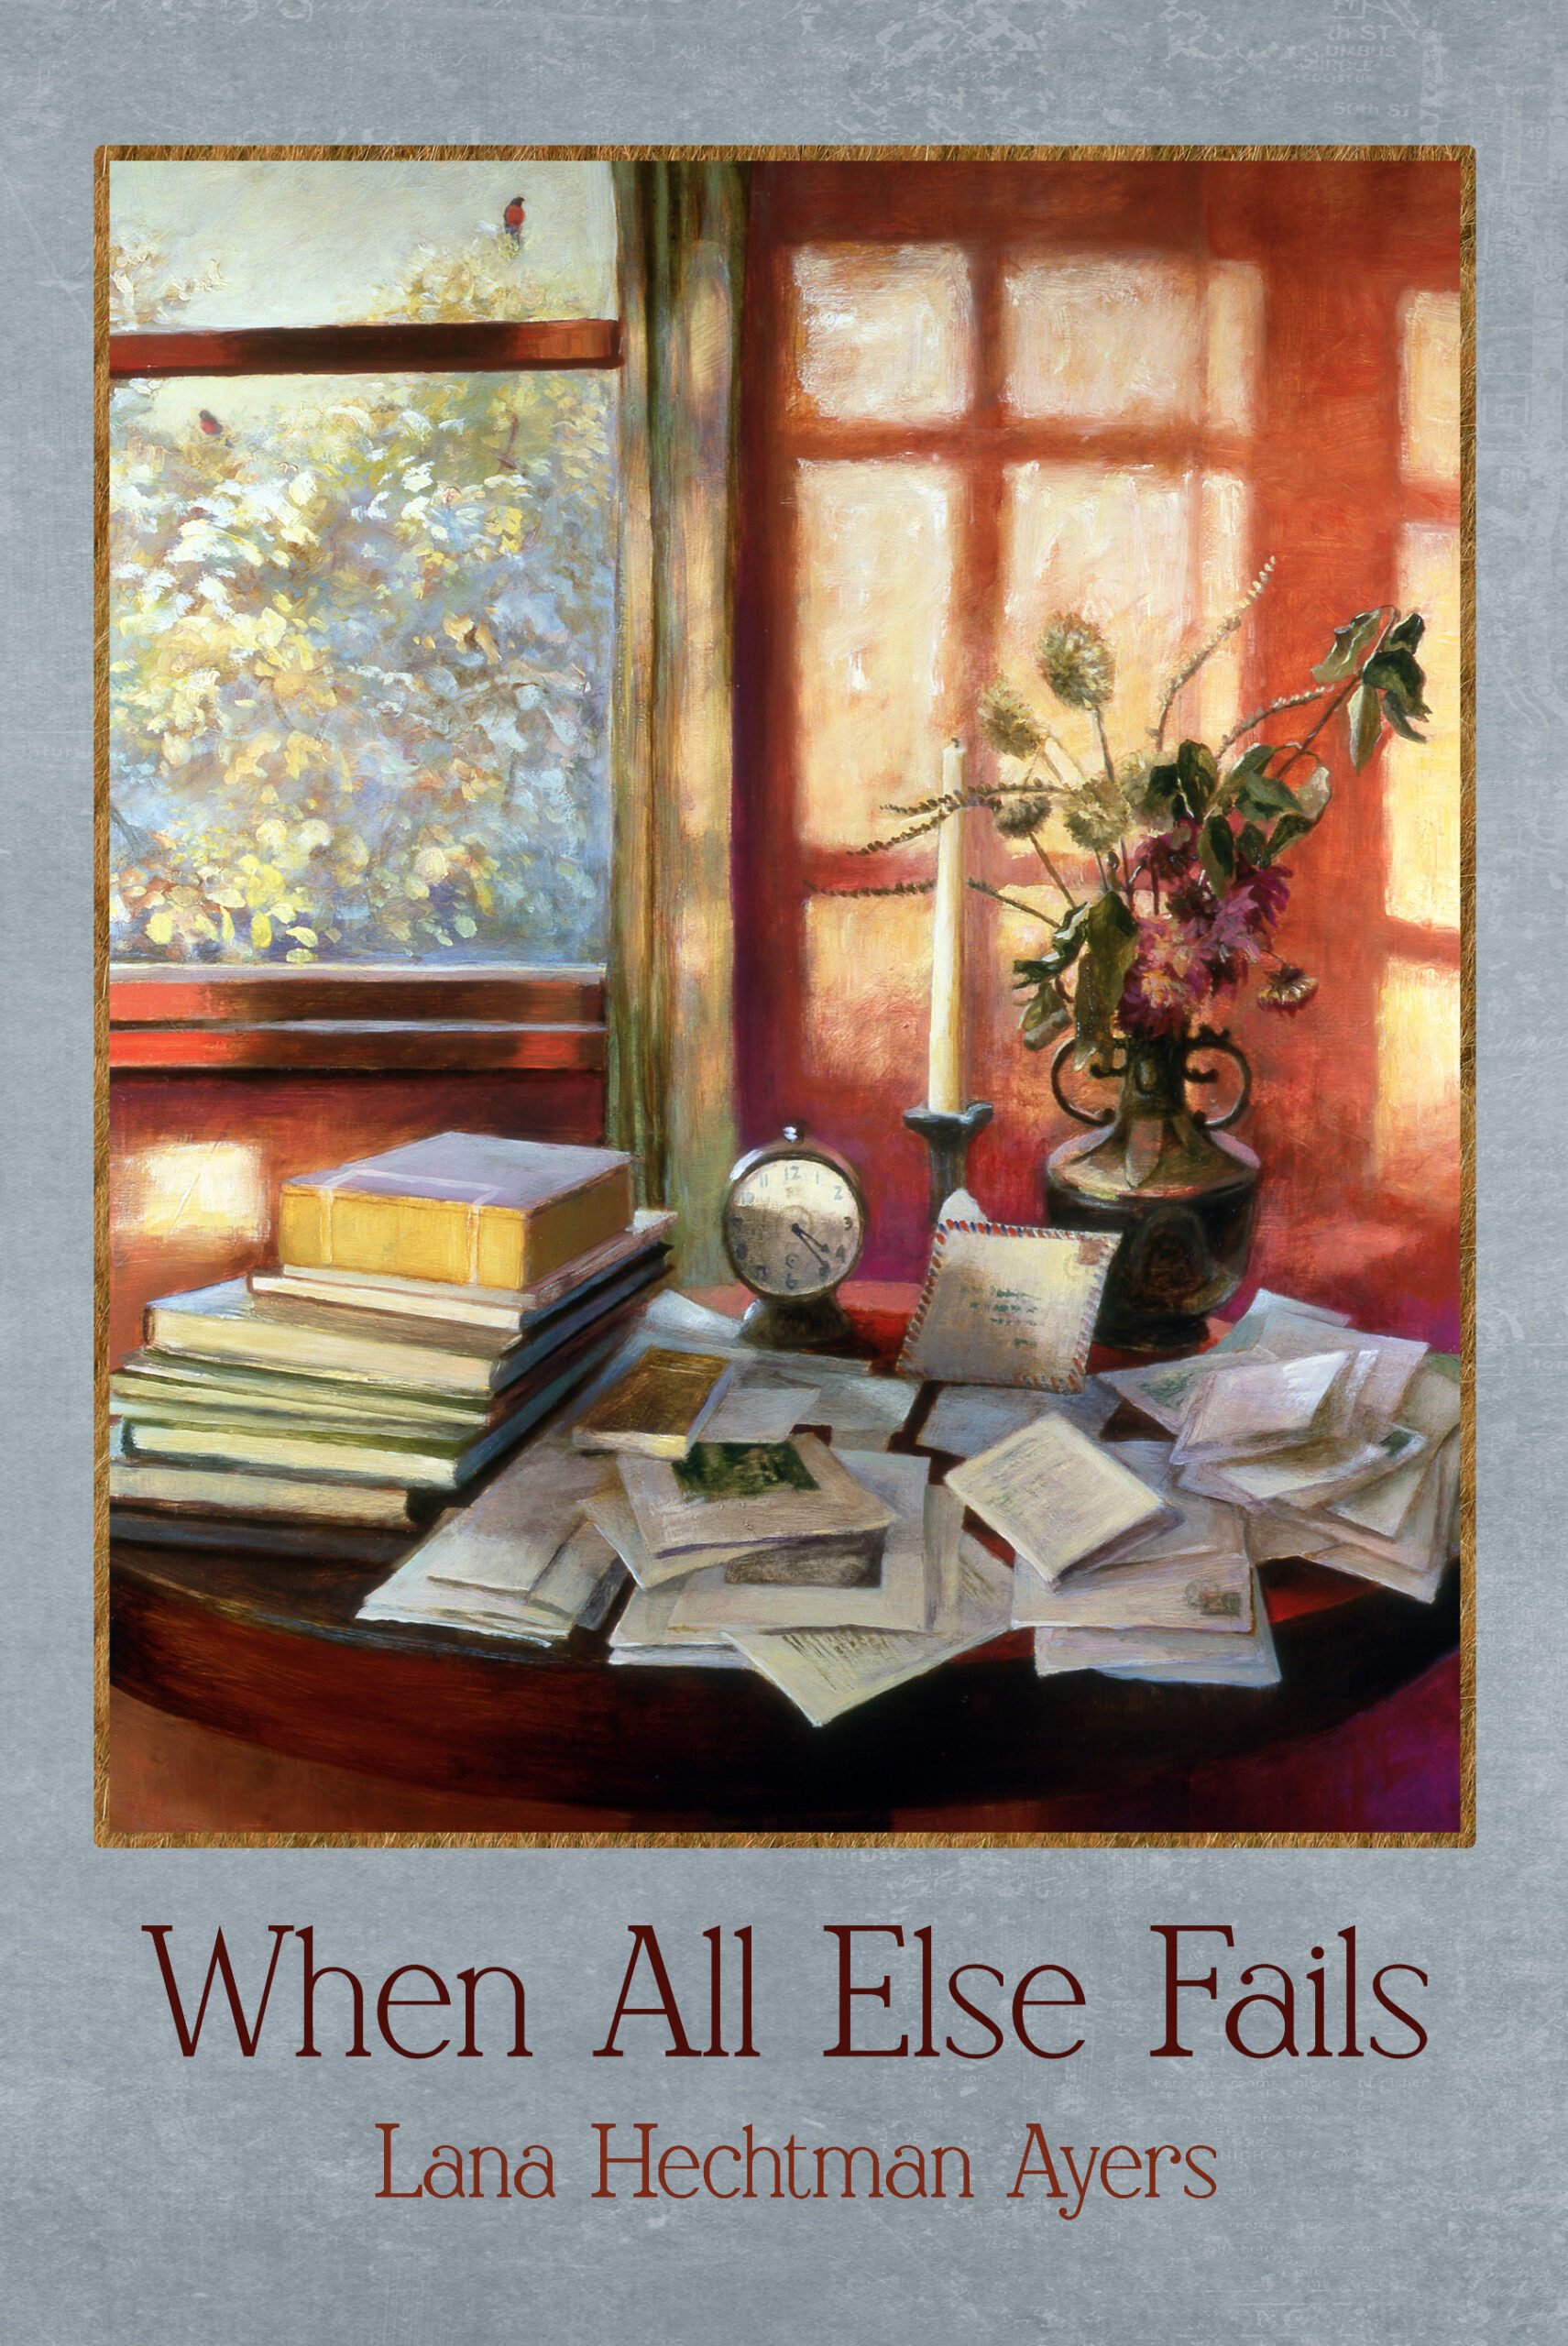 When All Else Fails by Lana Hechtman Ayers